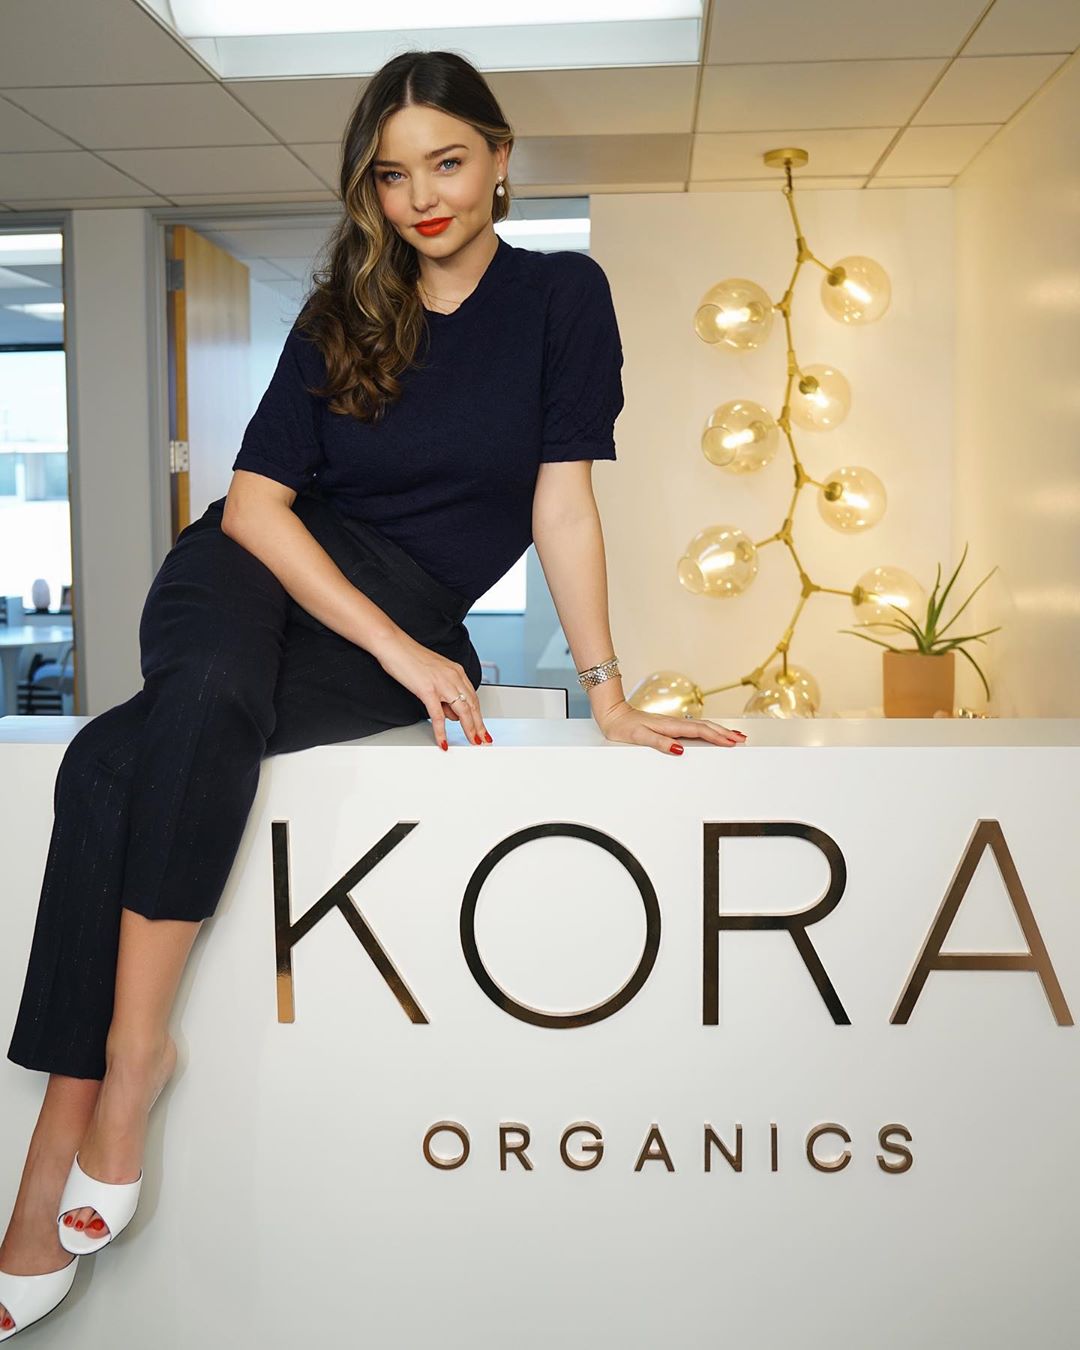 Miranda Kerr has a series of formulas for dressing super young and beautiful, no wonder few people expect her to be 37 years old - Photo 10.